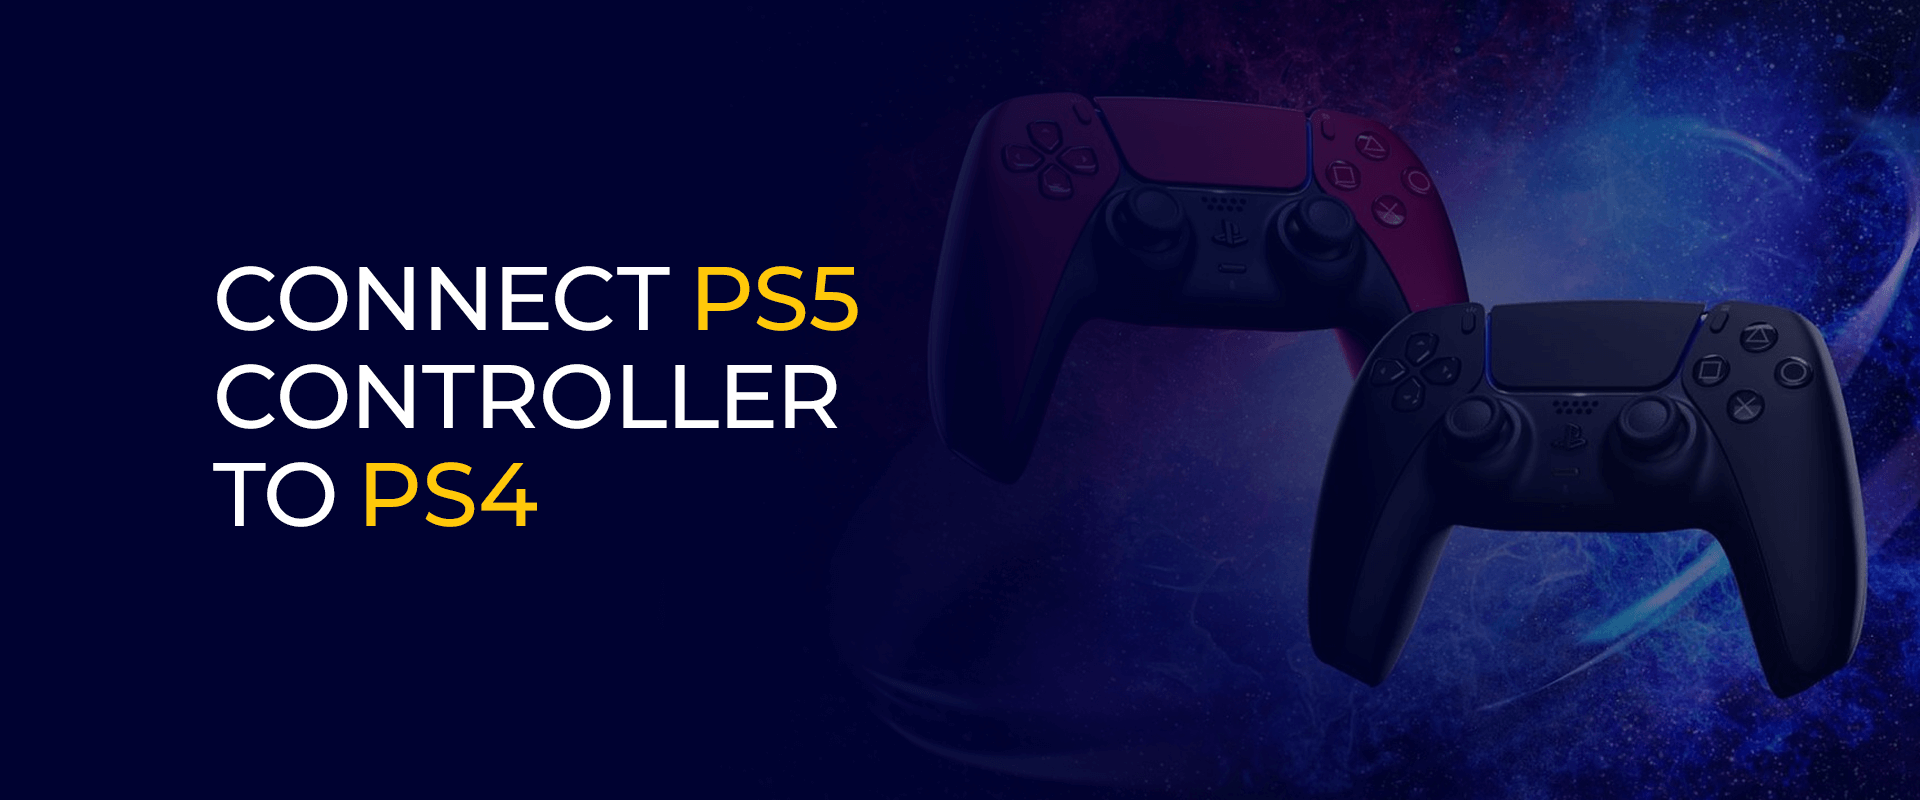 Connect PS5 Controller to PS4